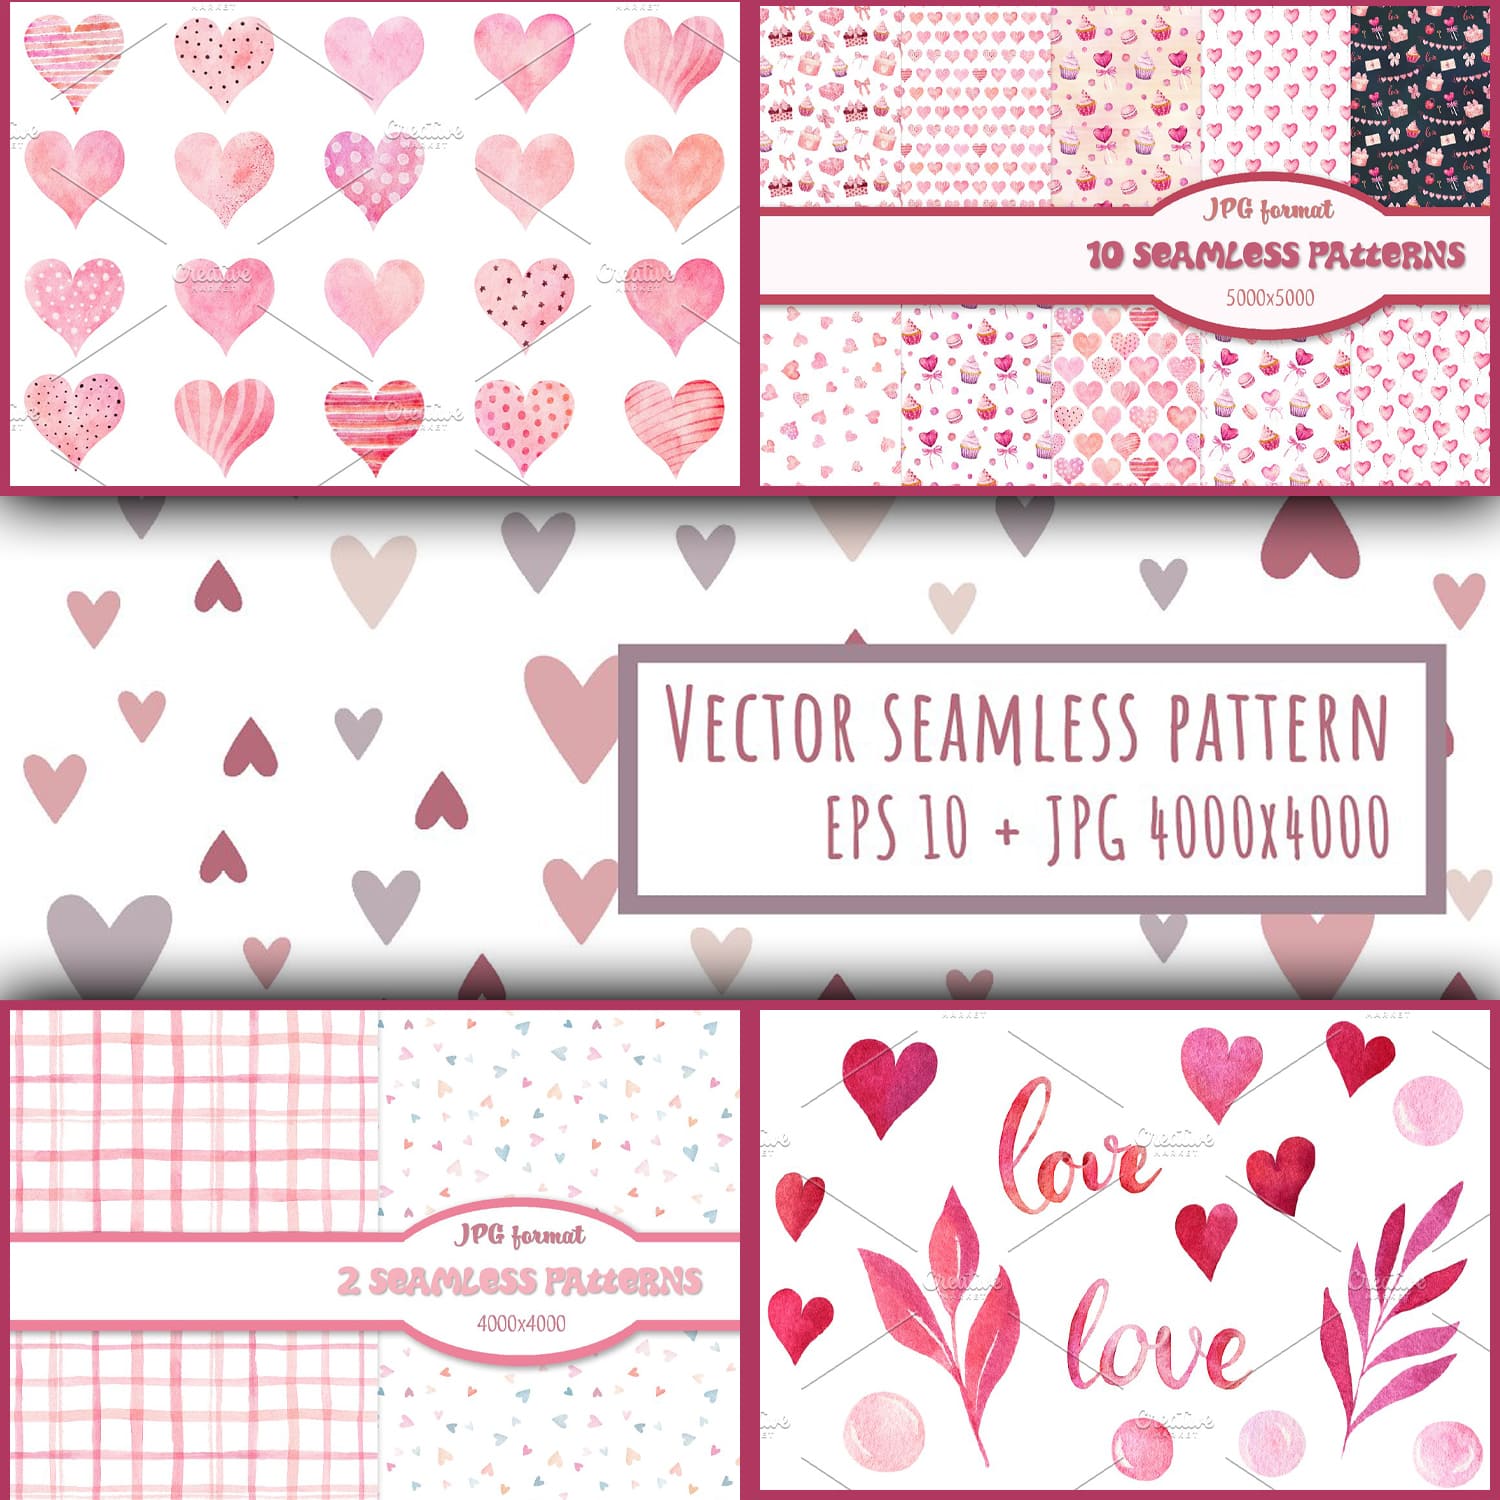 Big set for Valentine's Day created by Nataliia Pyzhova.